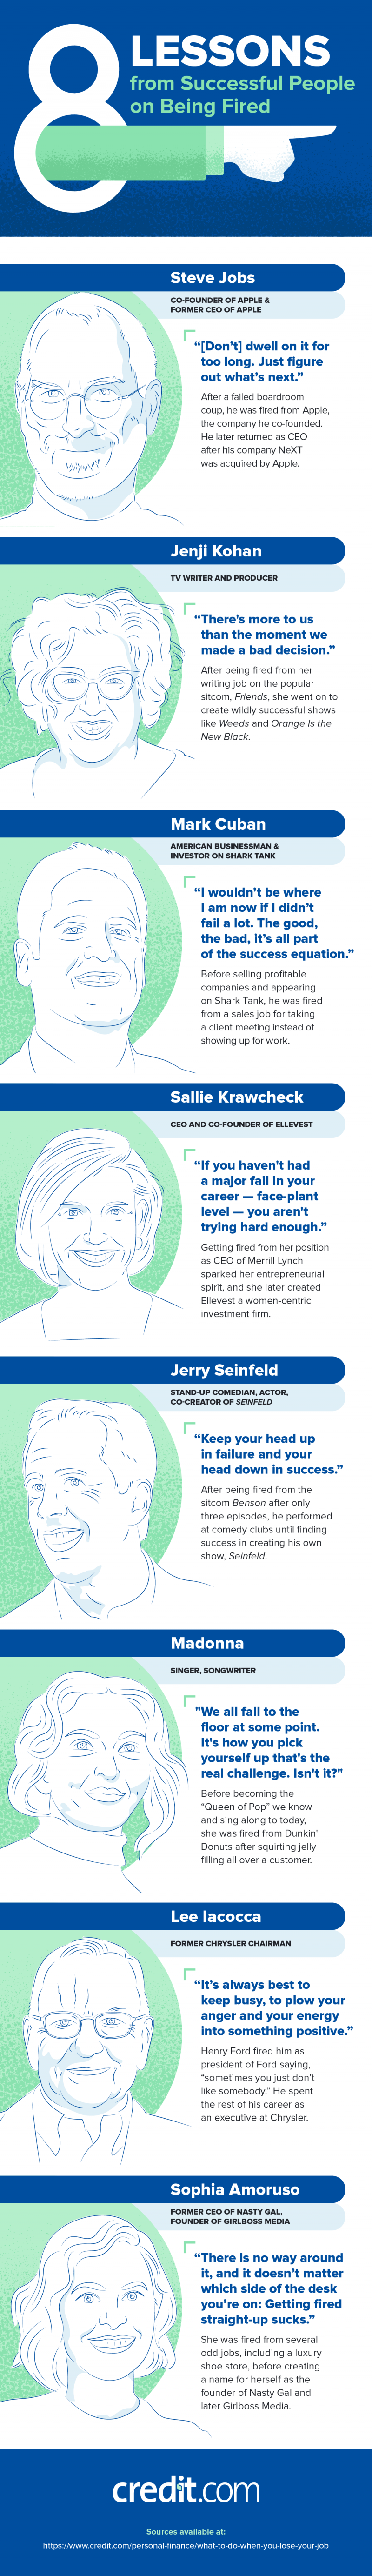 lessons-on-being-fire-from-successful-people.infographic